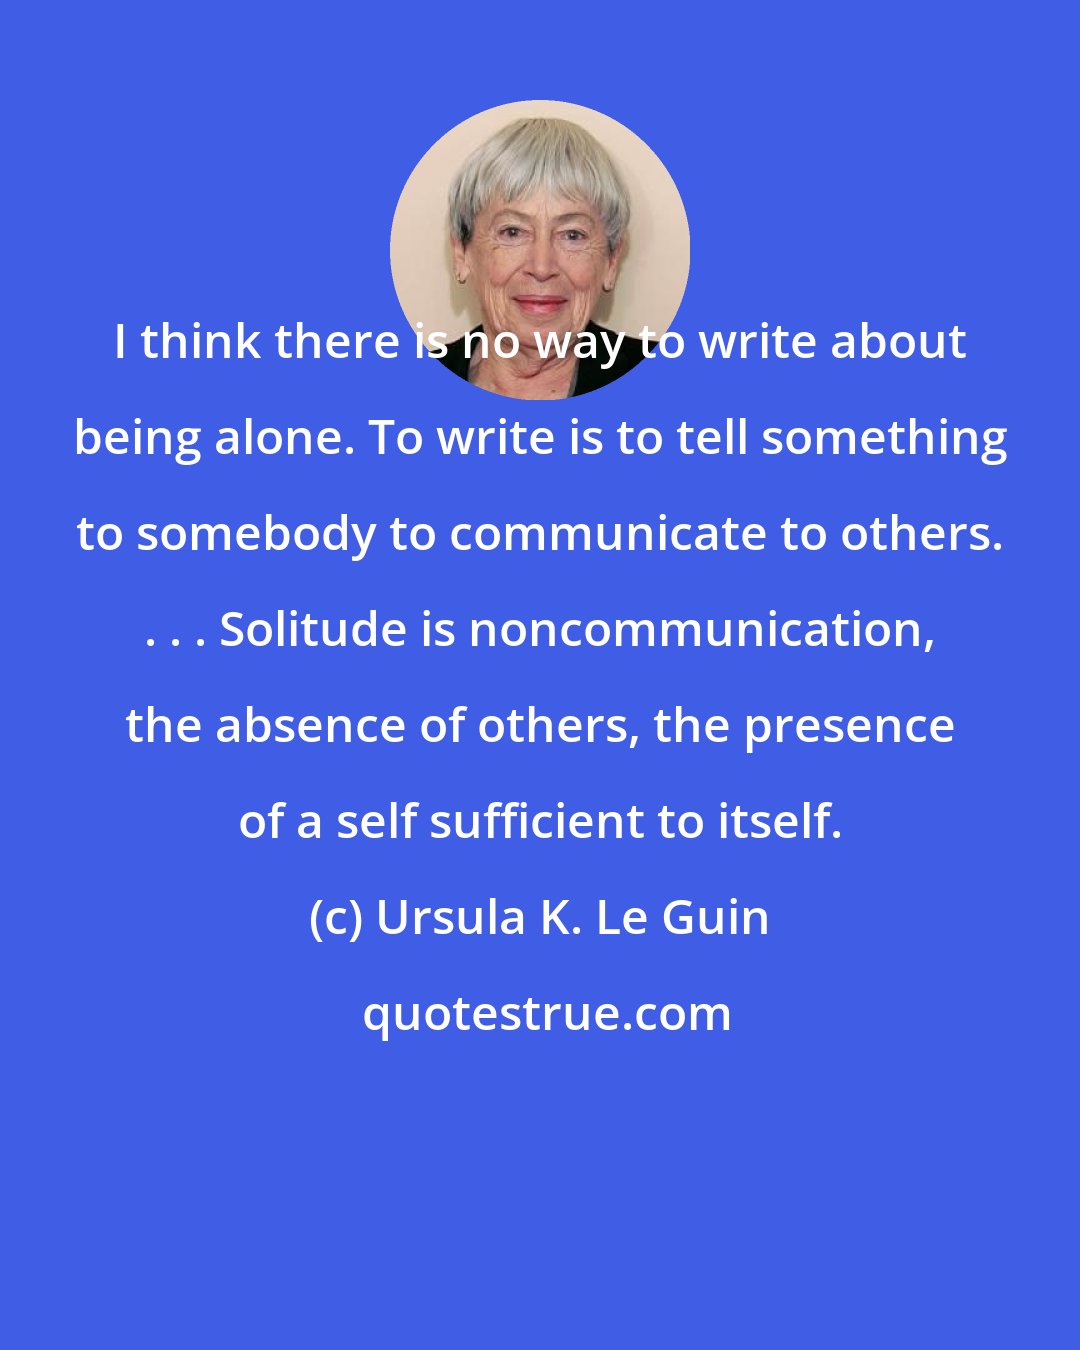 Ursula K. Le Guin: I think there is no way to write about being alone. To write is to tell something to somebody to communicate to others. . . . Solitude is noncommunication, the absence of others, the presence of a self sufficient to itself.